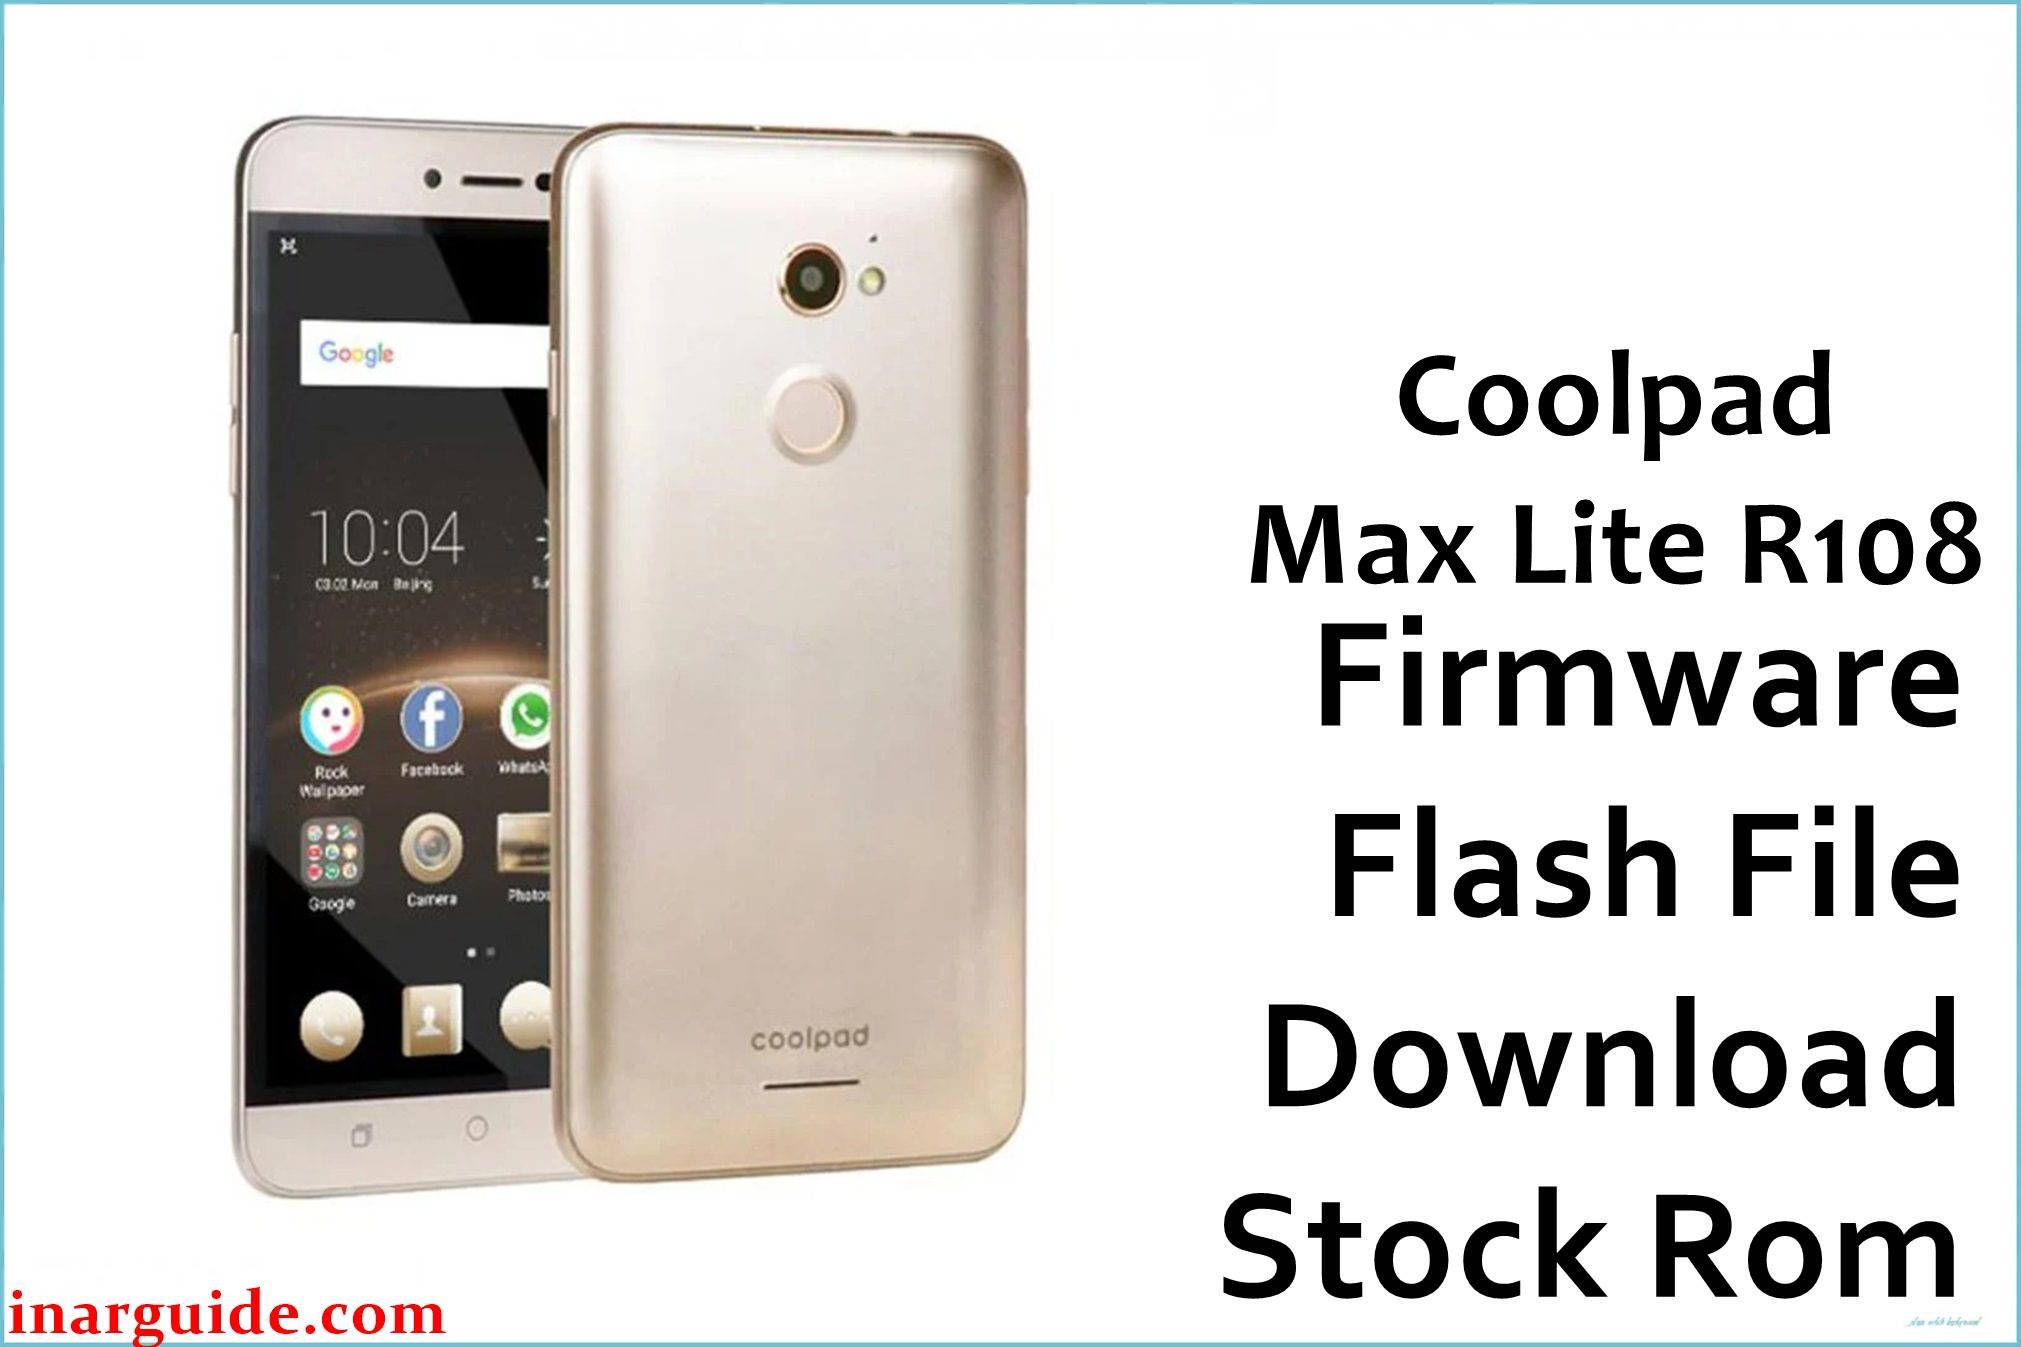 Coolpad Max Lite R108 Firmware Flash File Download [Stock Rom]